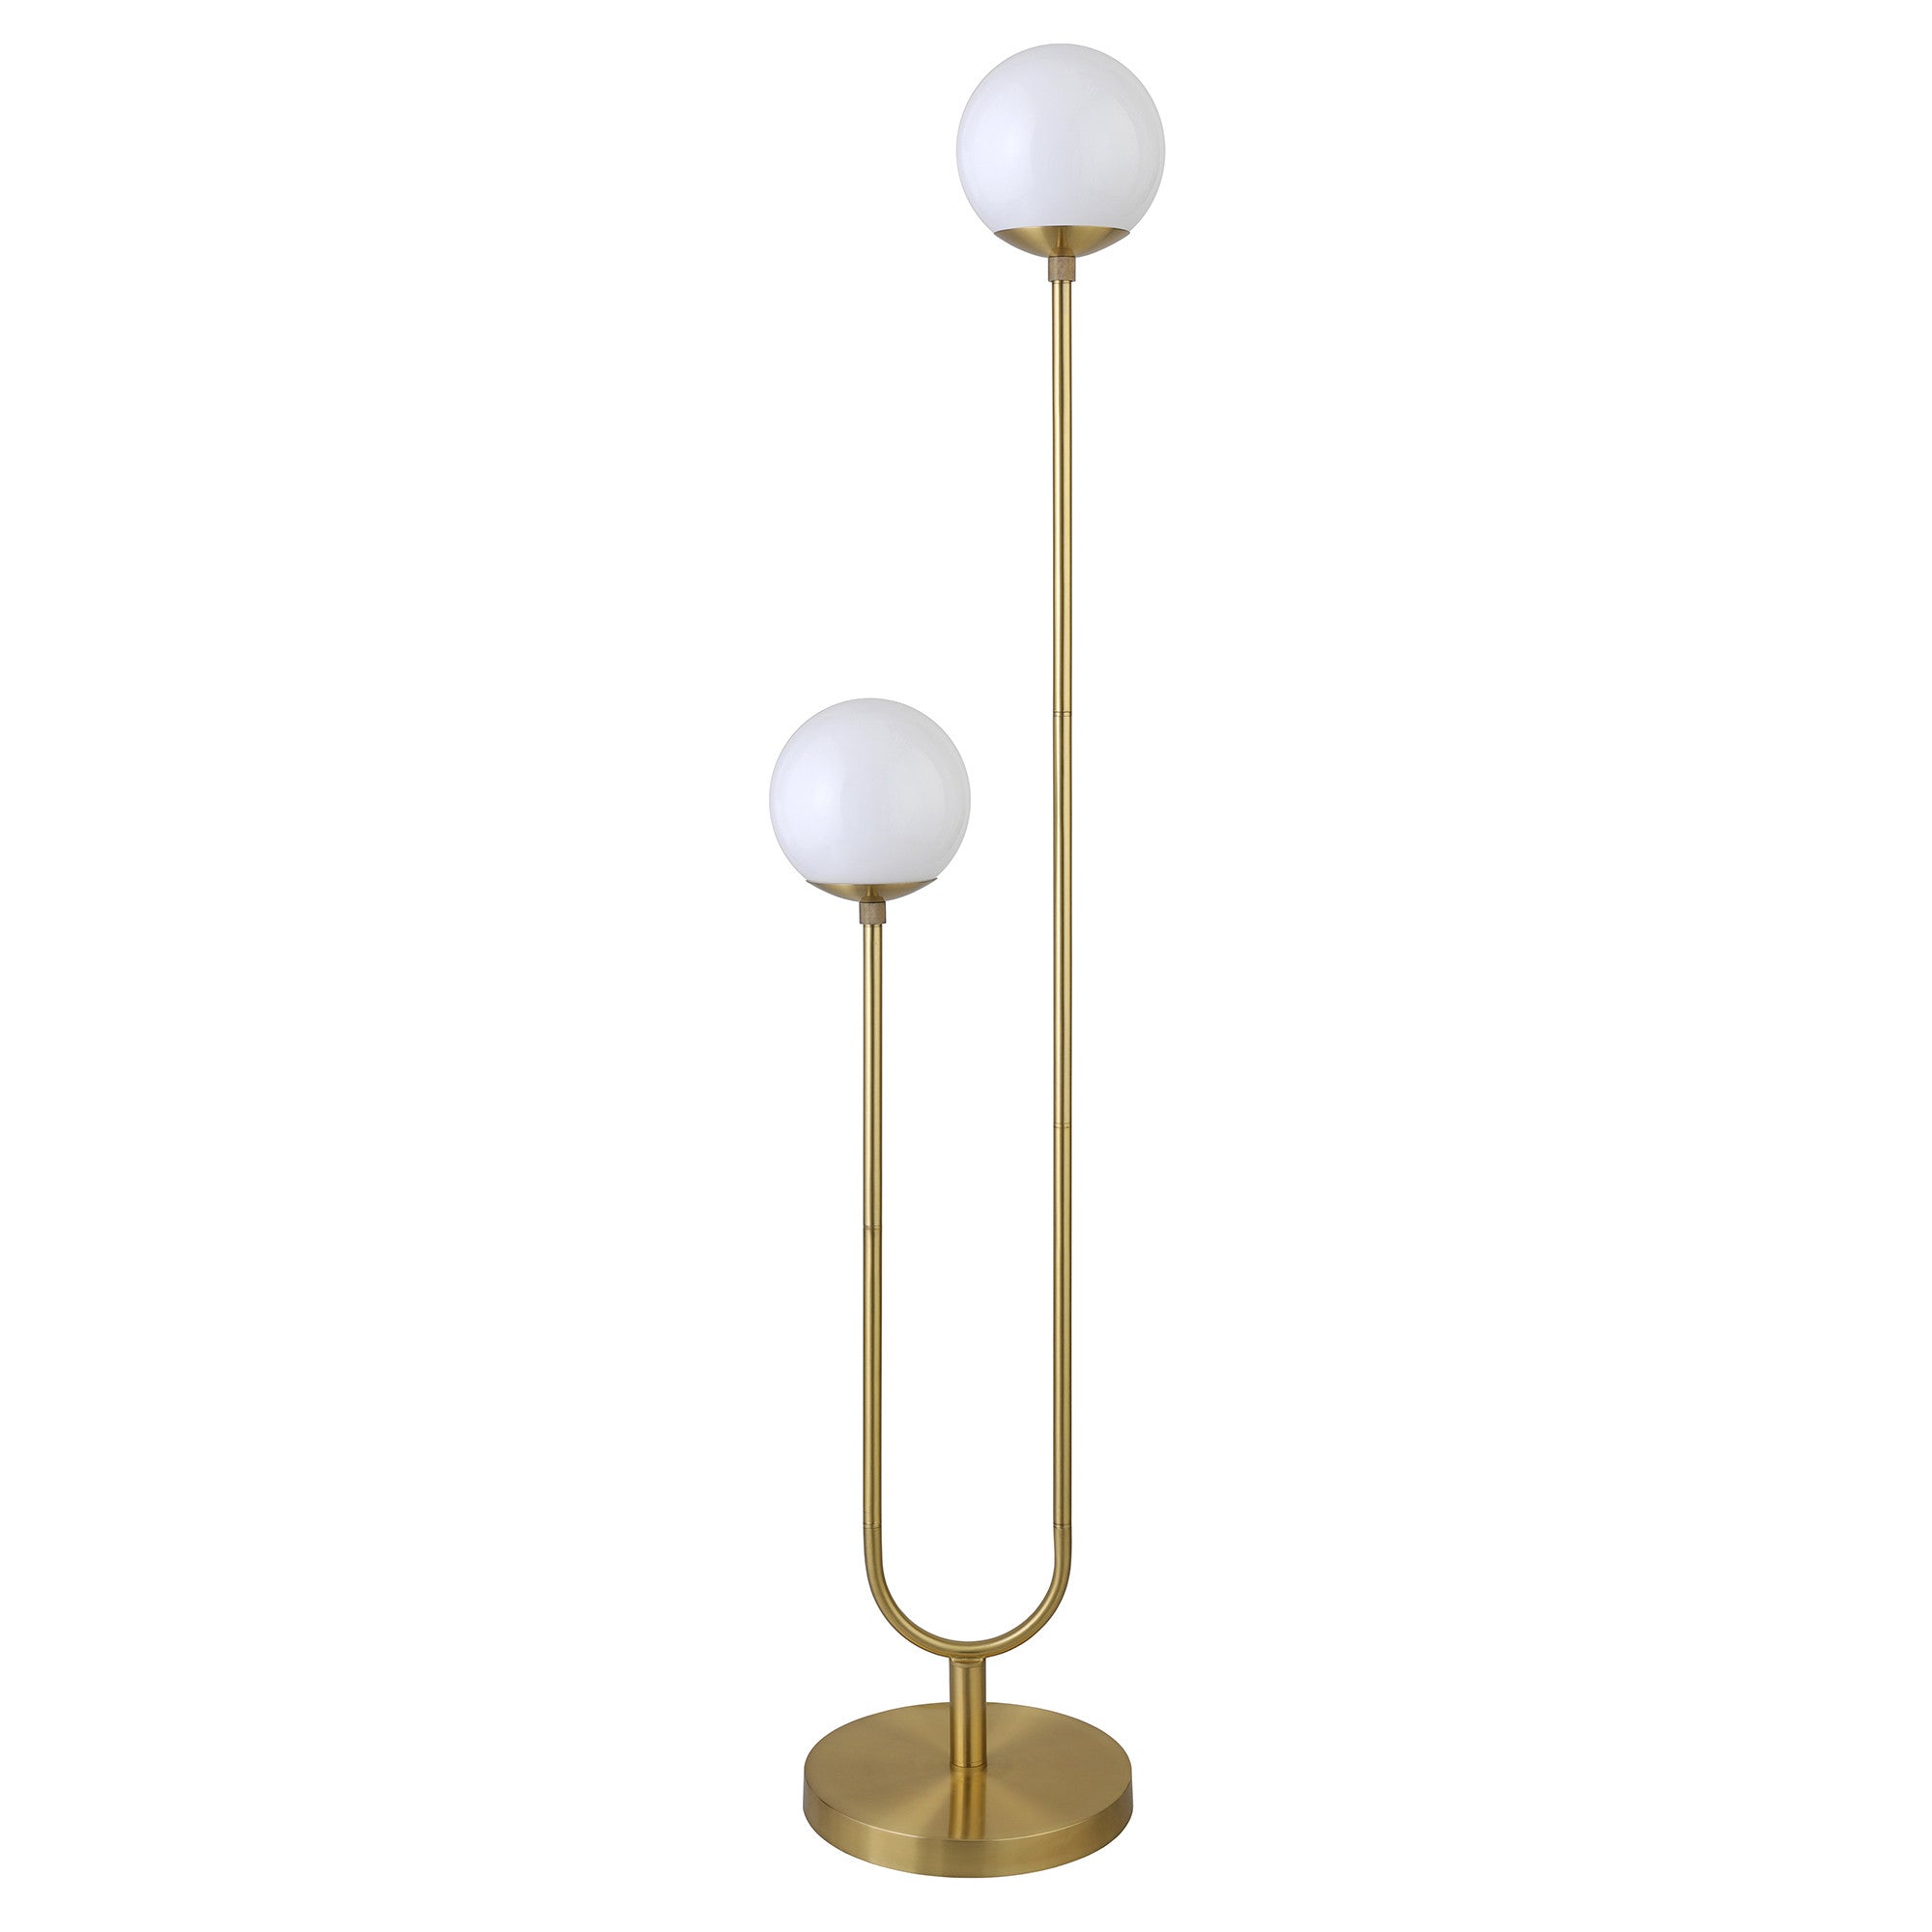 69" Brass Two Light Novelty Floor Lamp With White Frosted Glass Globe Shade